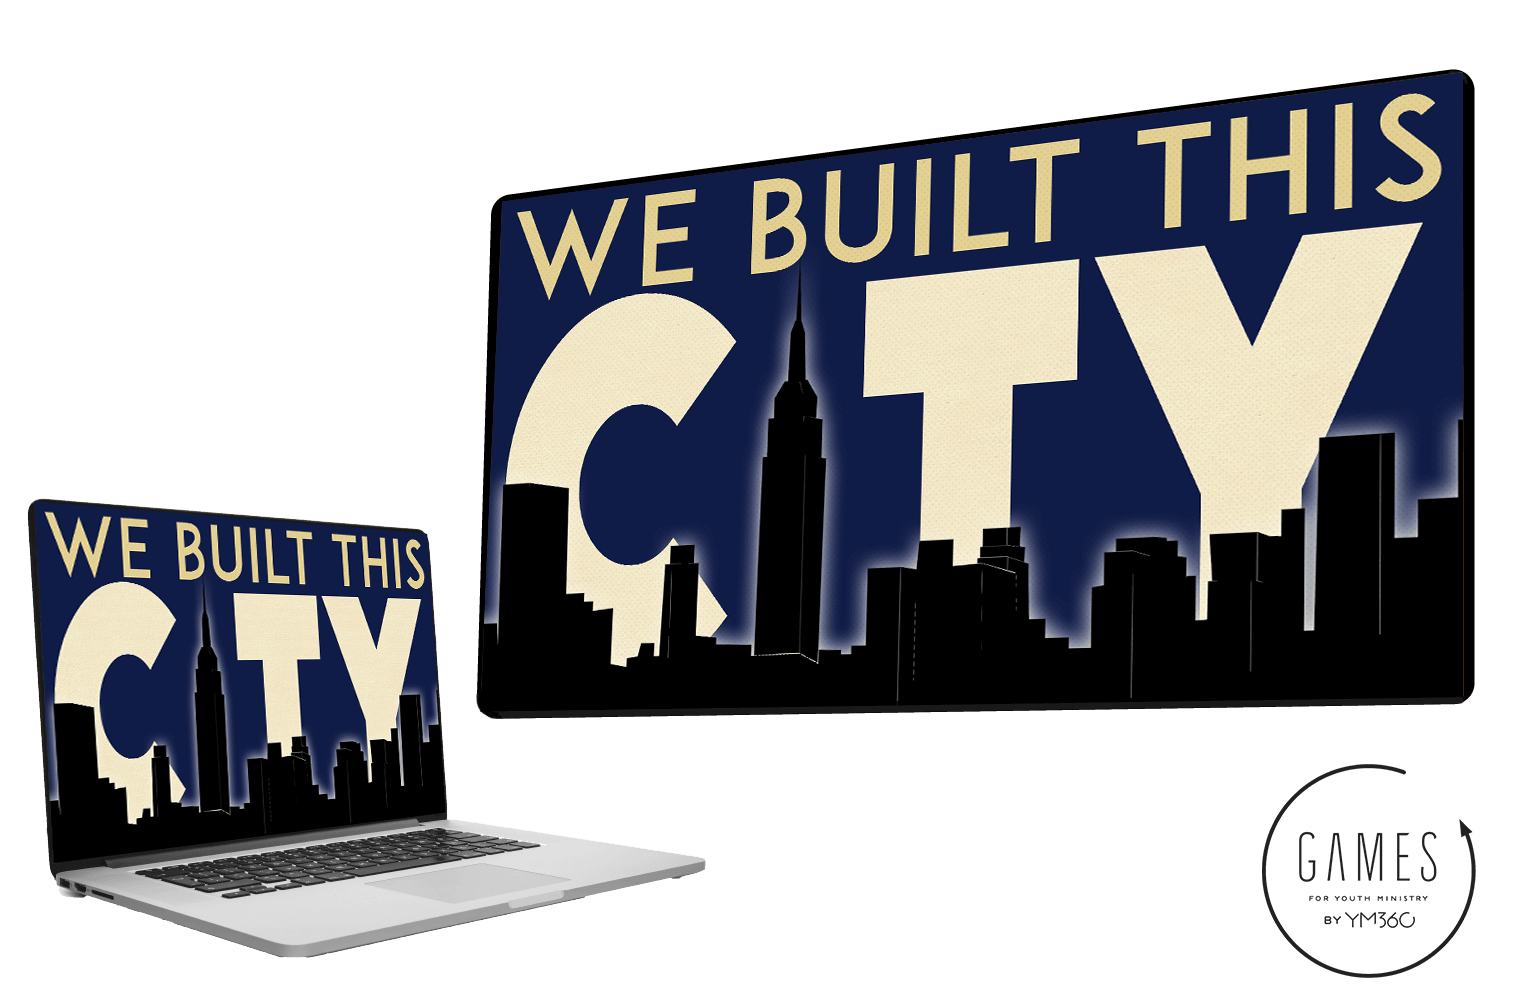 We Built This City